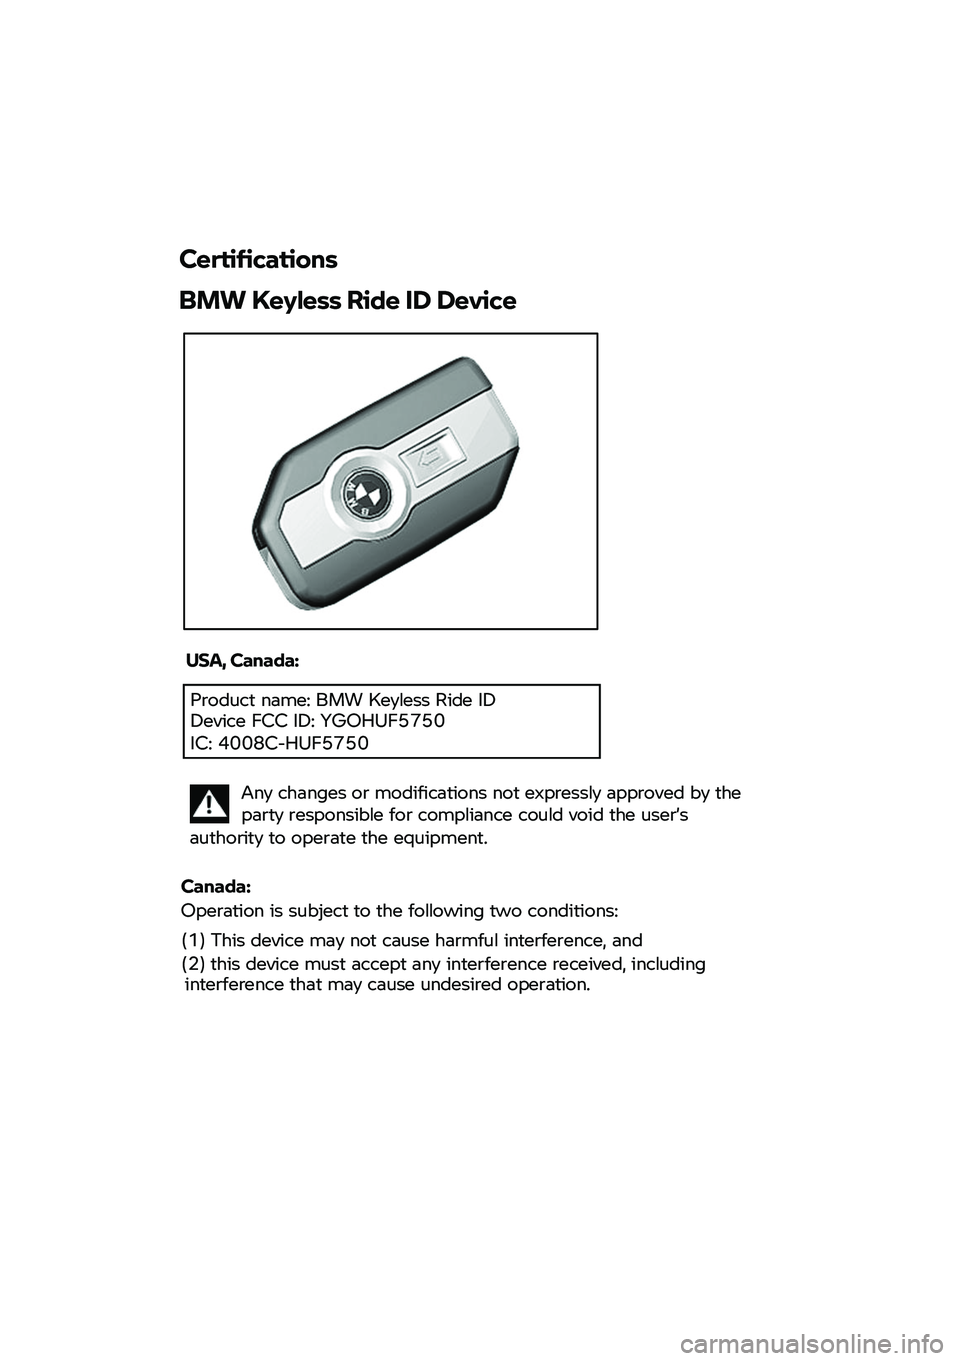 BMW MOTORRAD F 850 GS 2021  Handleiding (in Dutch)  
 
 
 
Certifications 
BMW Keyless Ride ID Device  
 
USA, Canada:  
  
Any changes or modifications not expressly approved by the party responsible for compliance could void the user’s 
authority 